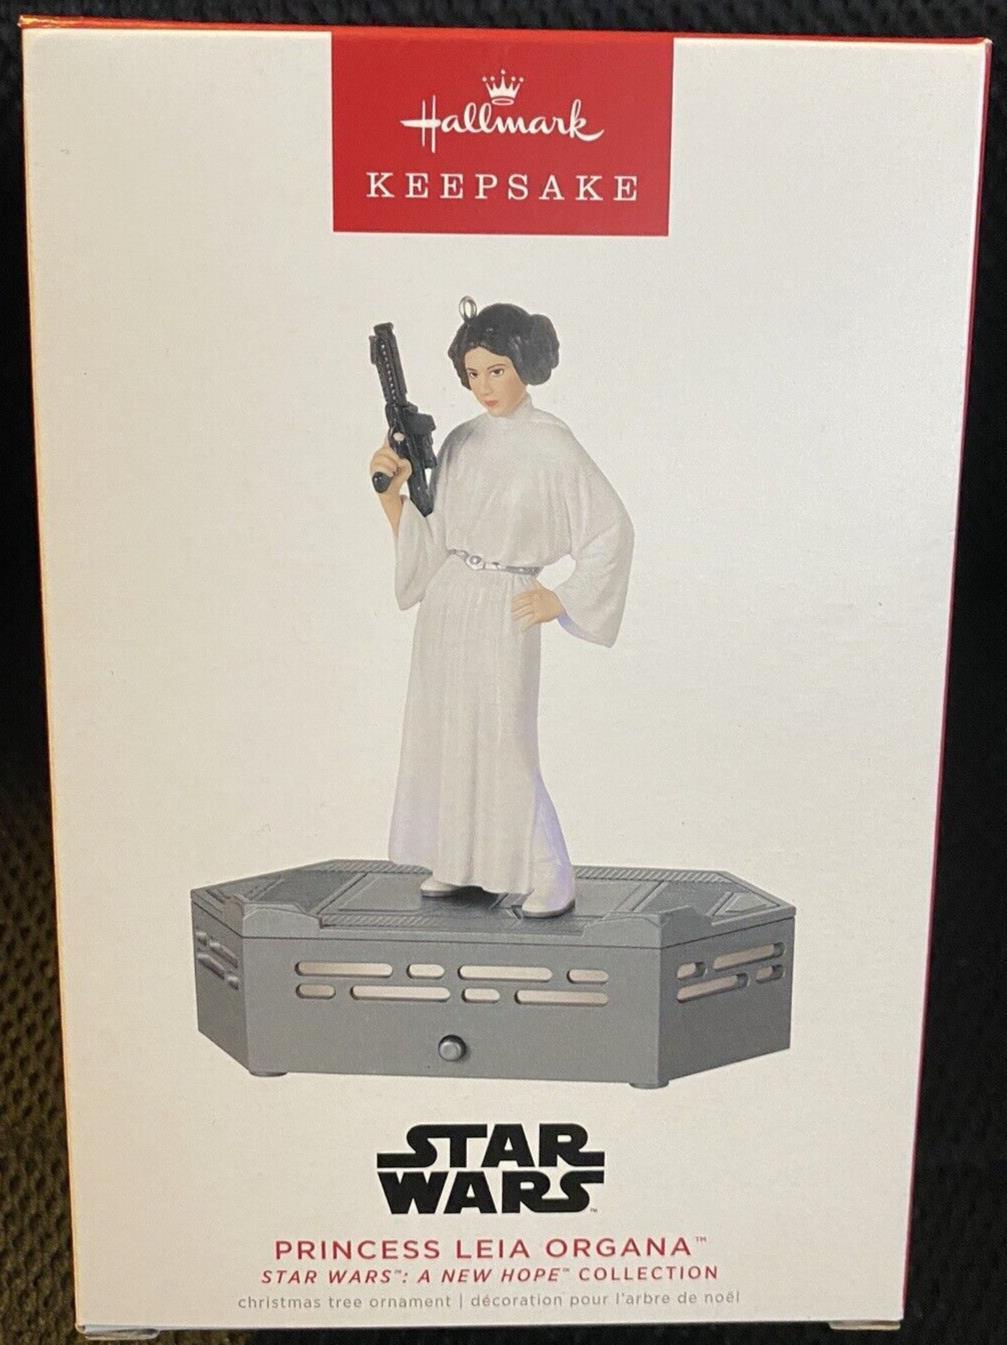 2022 Star Wars A New Hope Collection Princess Leia Organa Storytellers